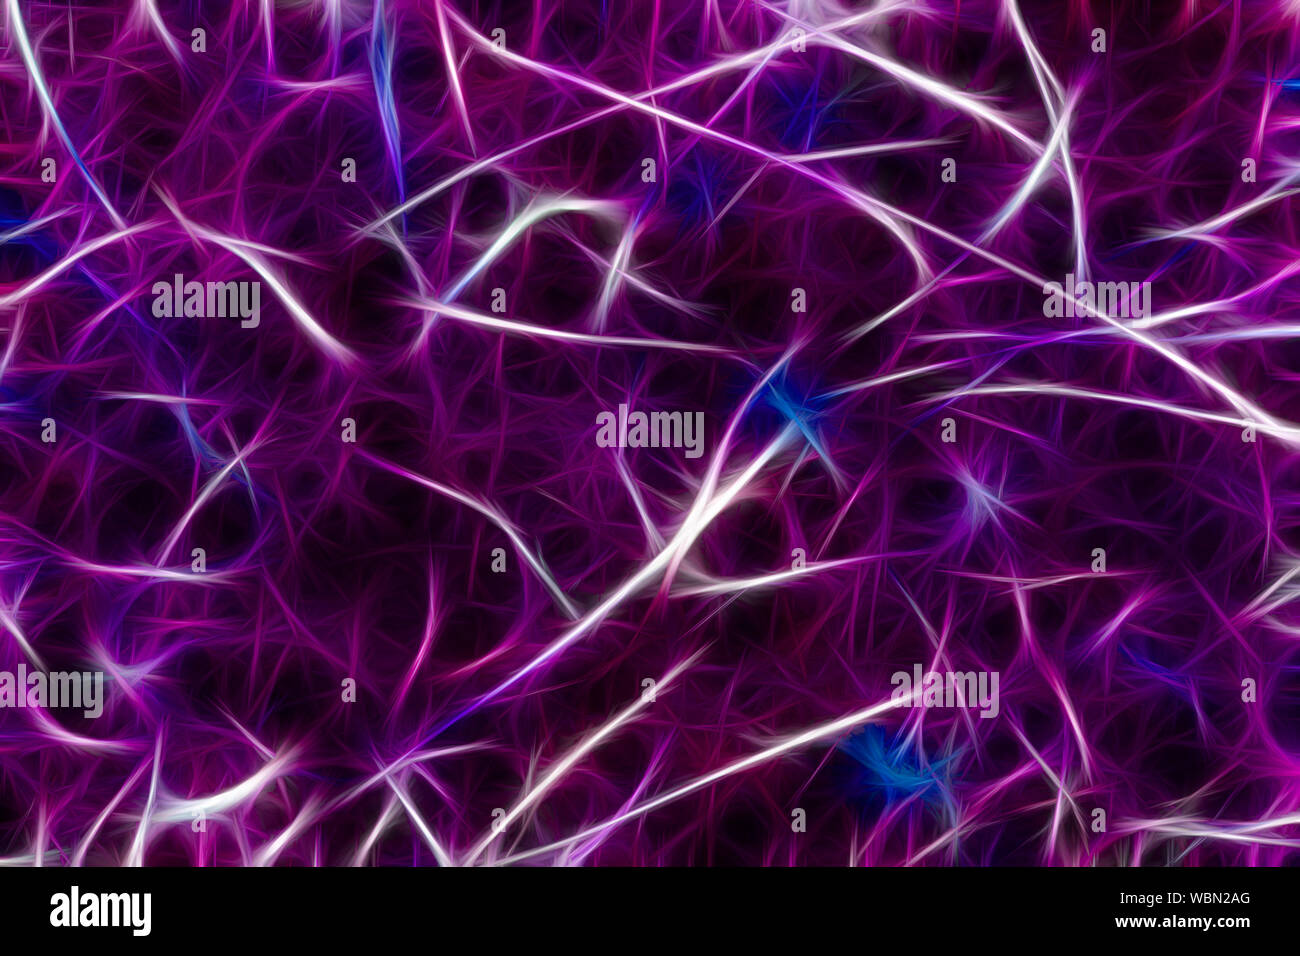 Neuron brain cells abstract background. Neurons connections backdrop painted in violet color. Stock Photo